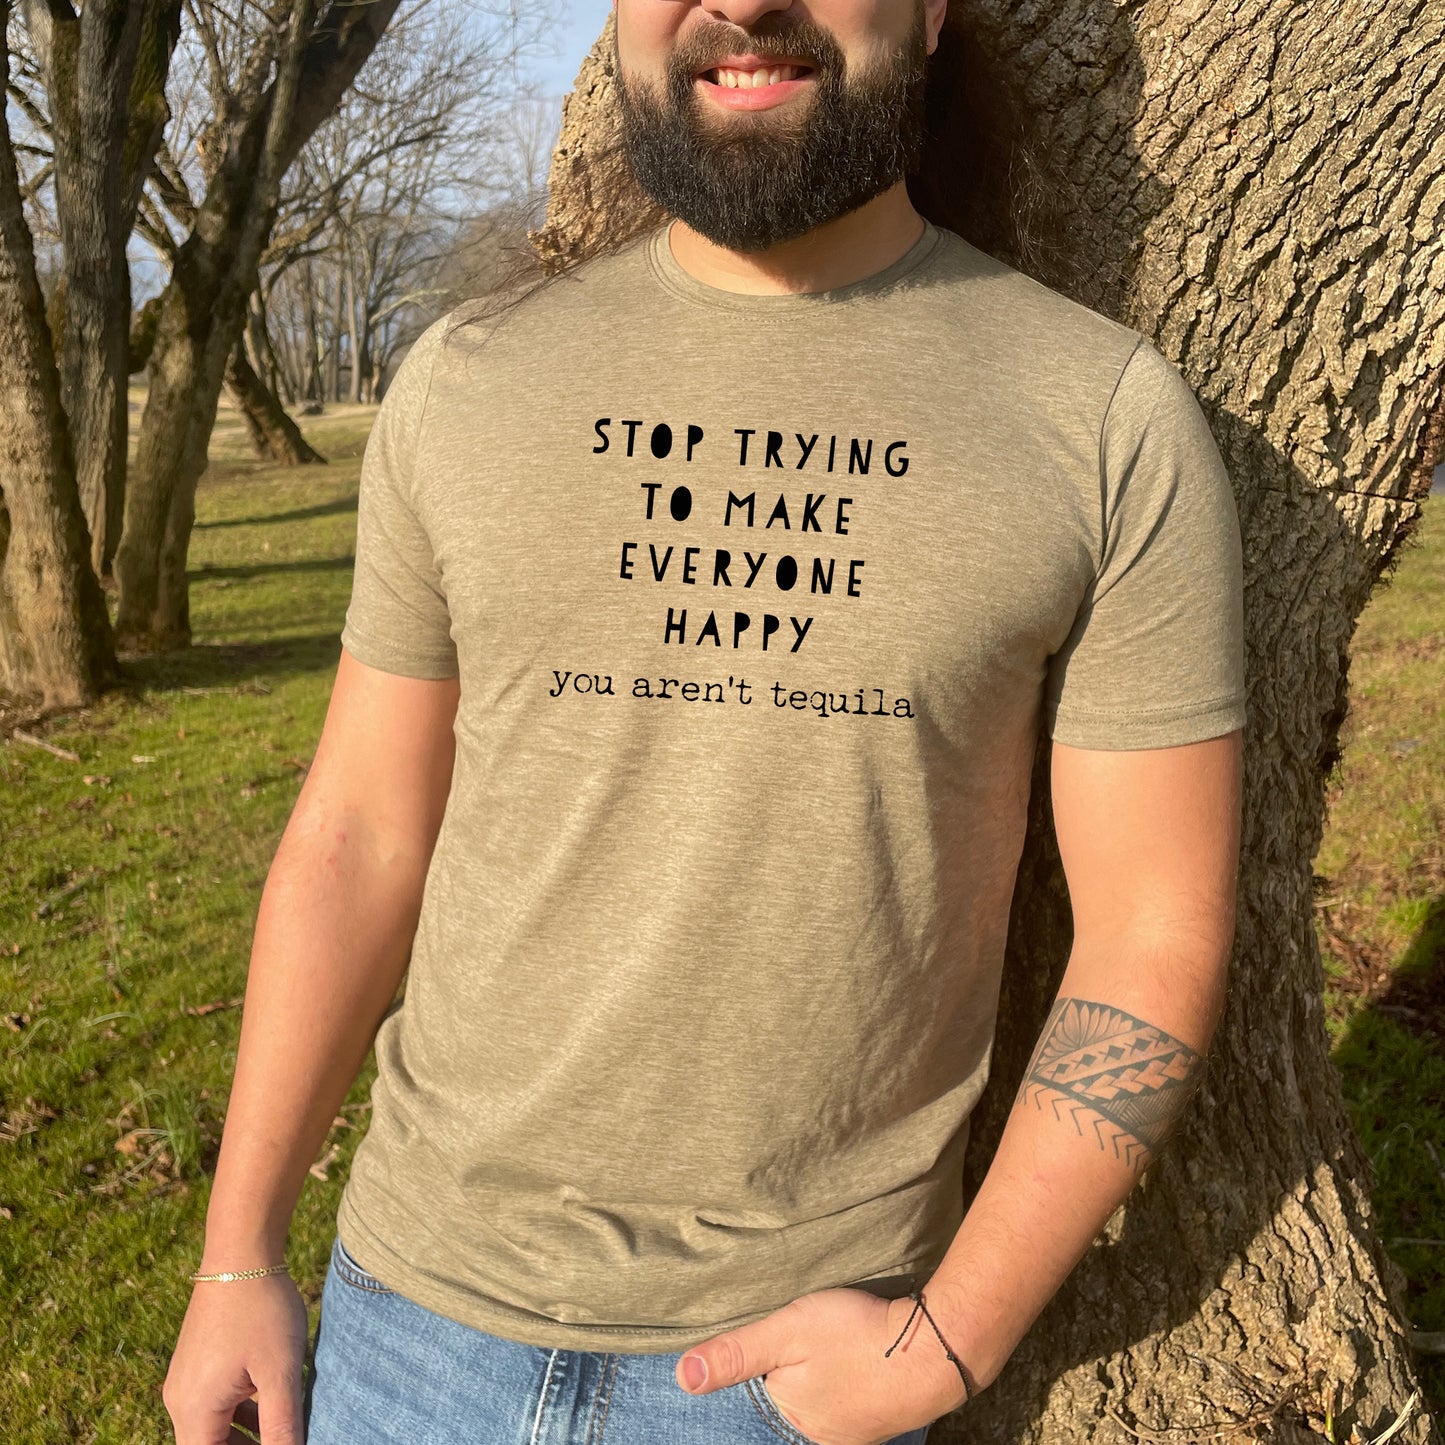 Stop Trying To Make Everyone Happy... You Aren't Tequila - Men's / Unisex Tee - Stonewash Blue or Sage